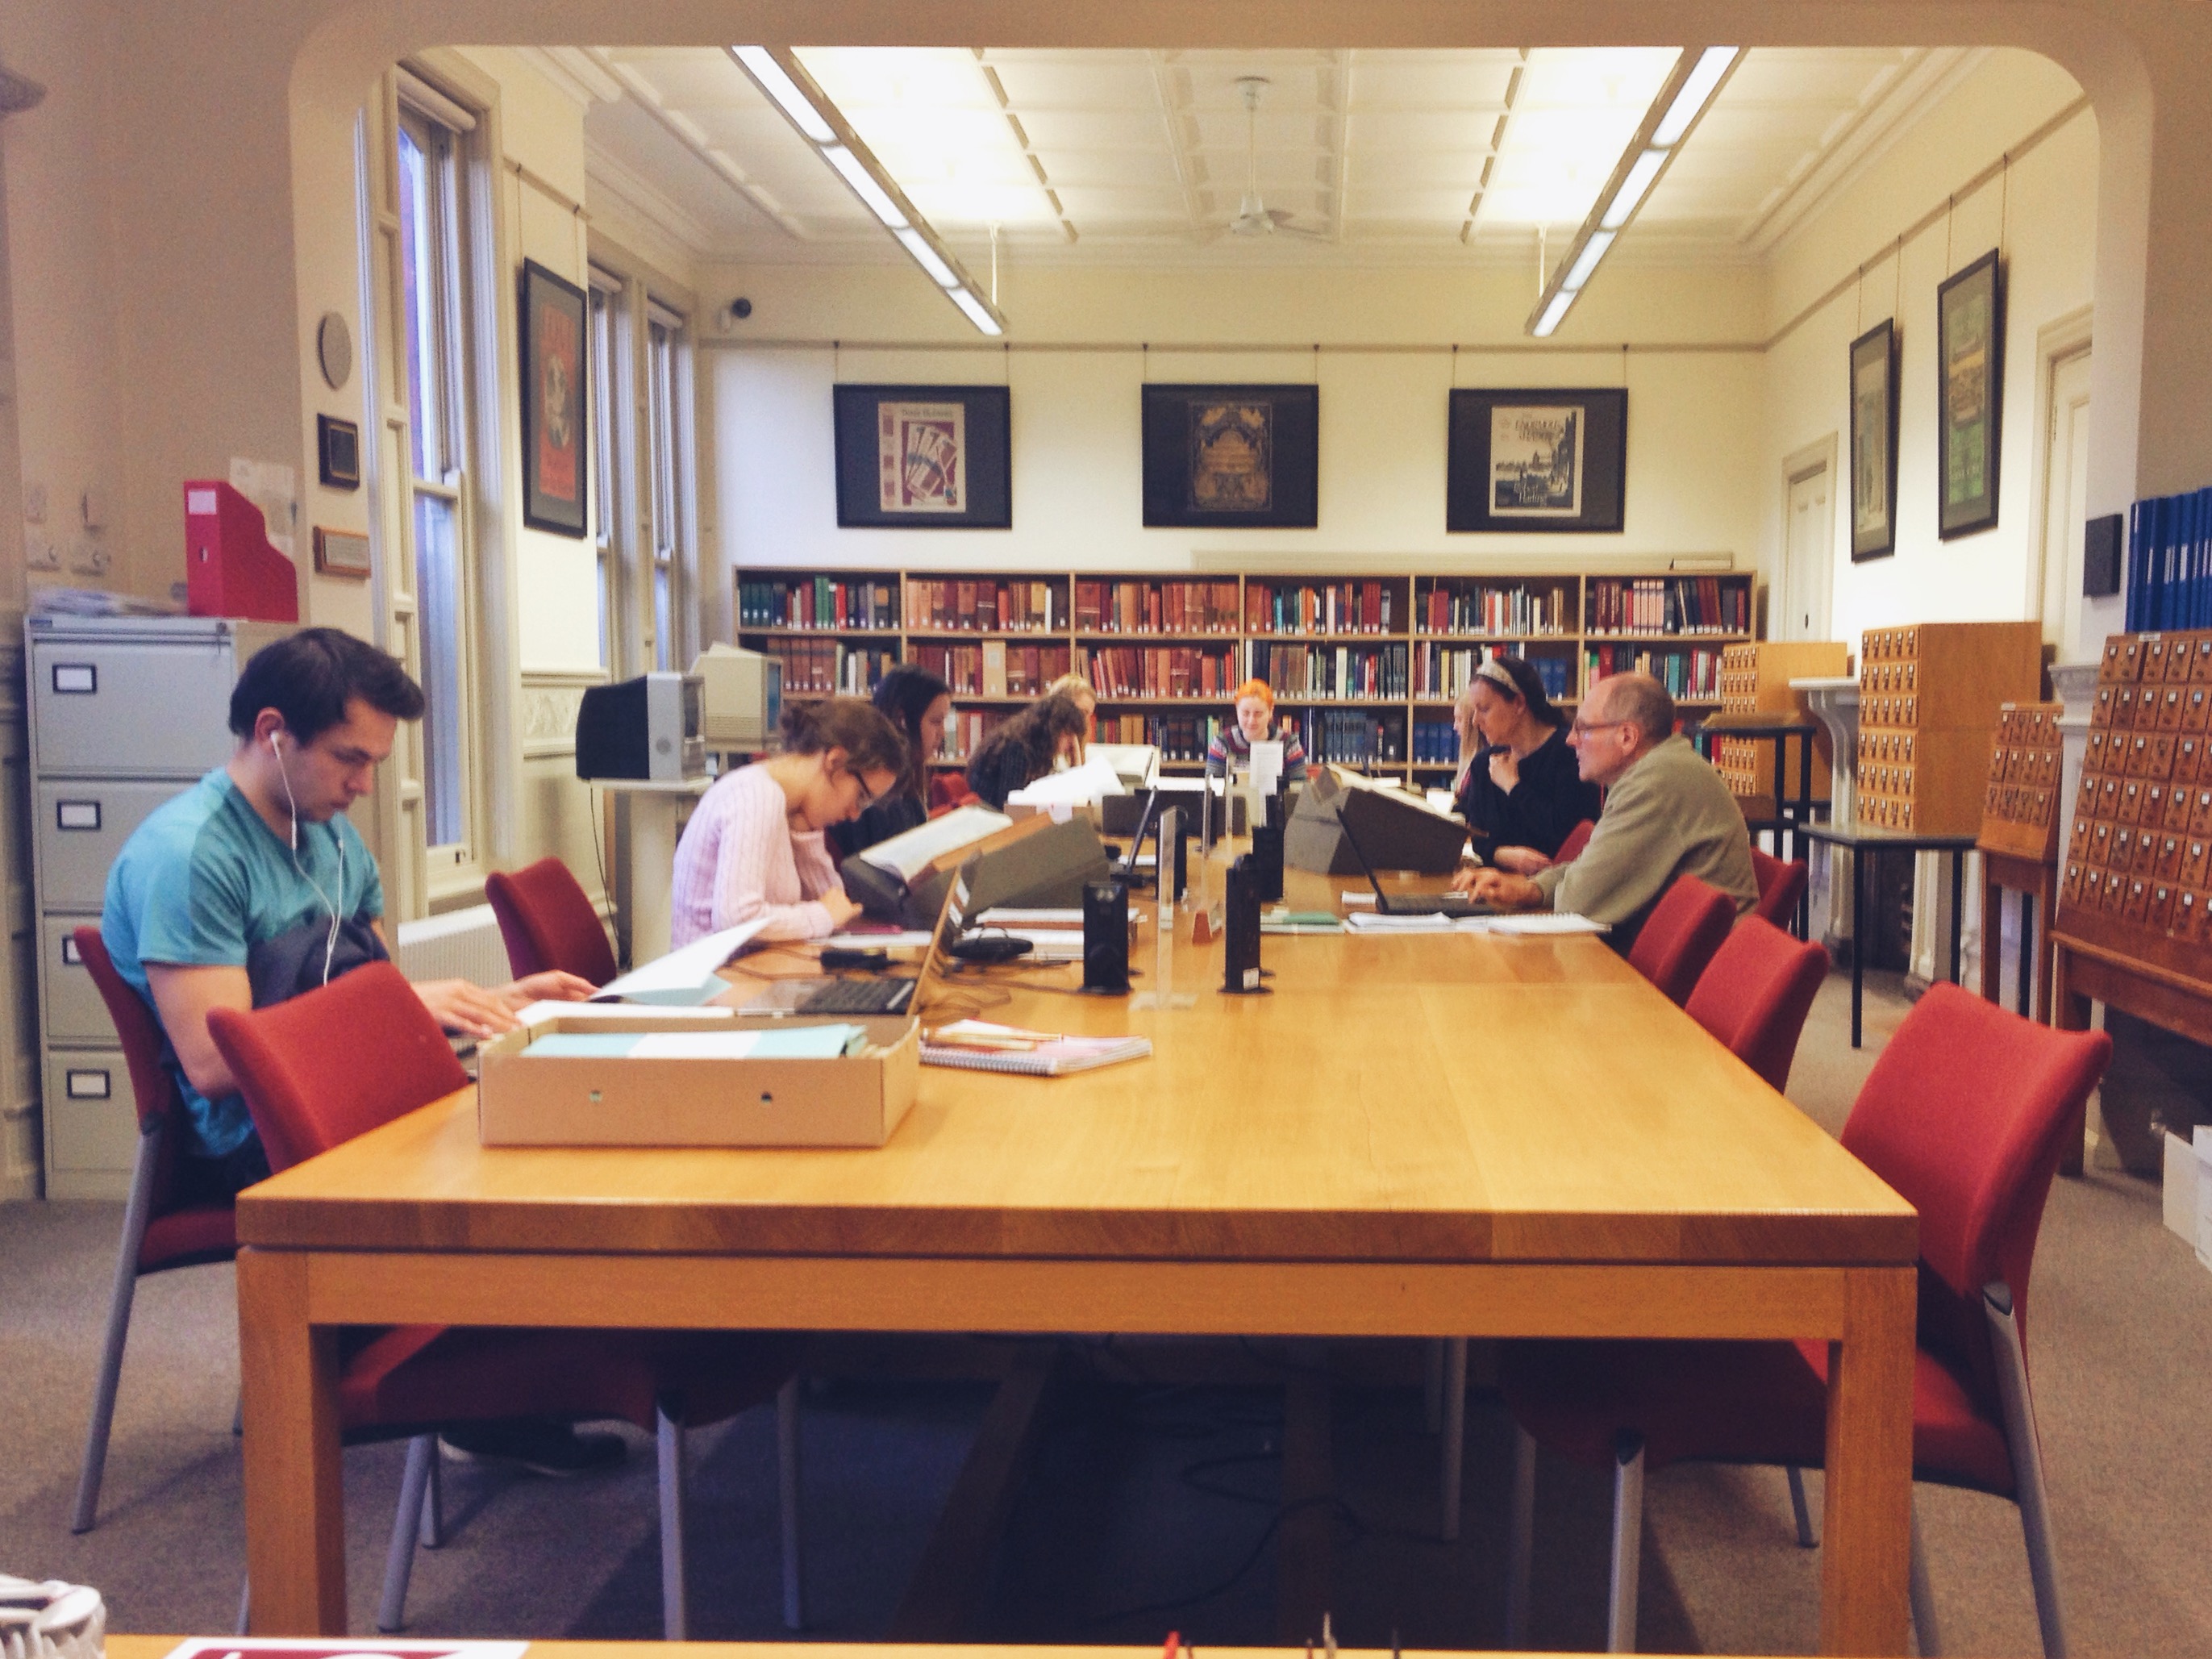 The view of the Reading Room from the supervisor's desk.